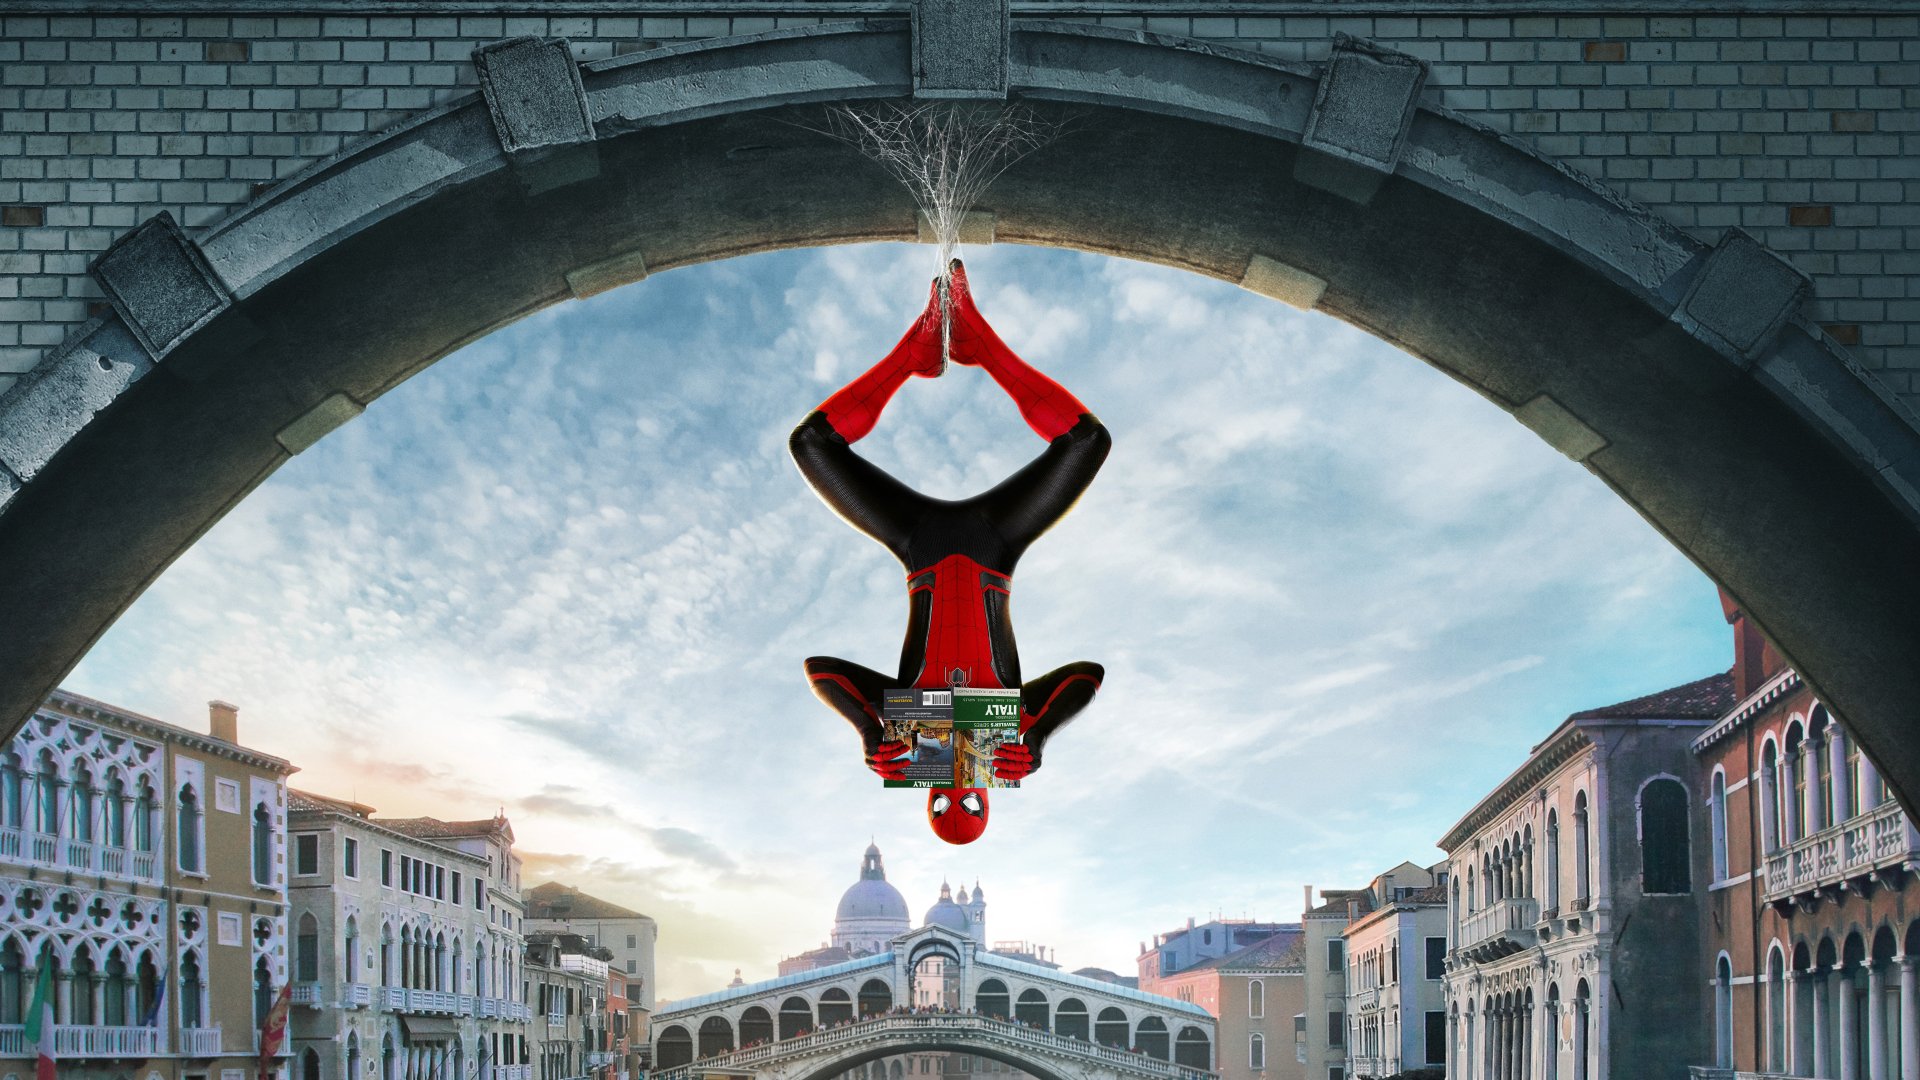 Spider-Man: Far From Home download the new version for ipod